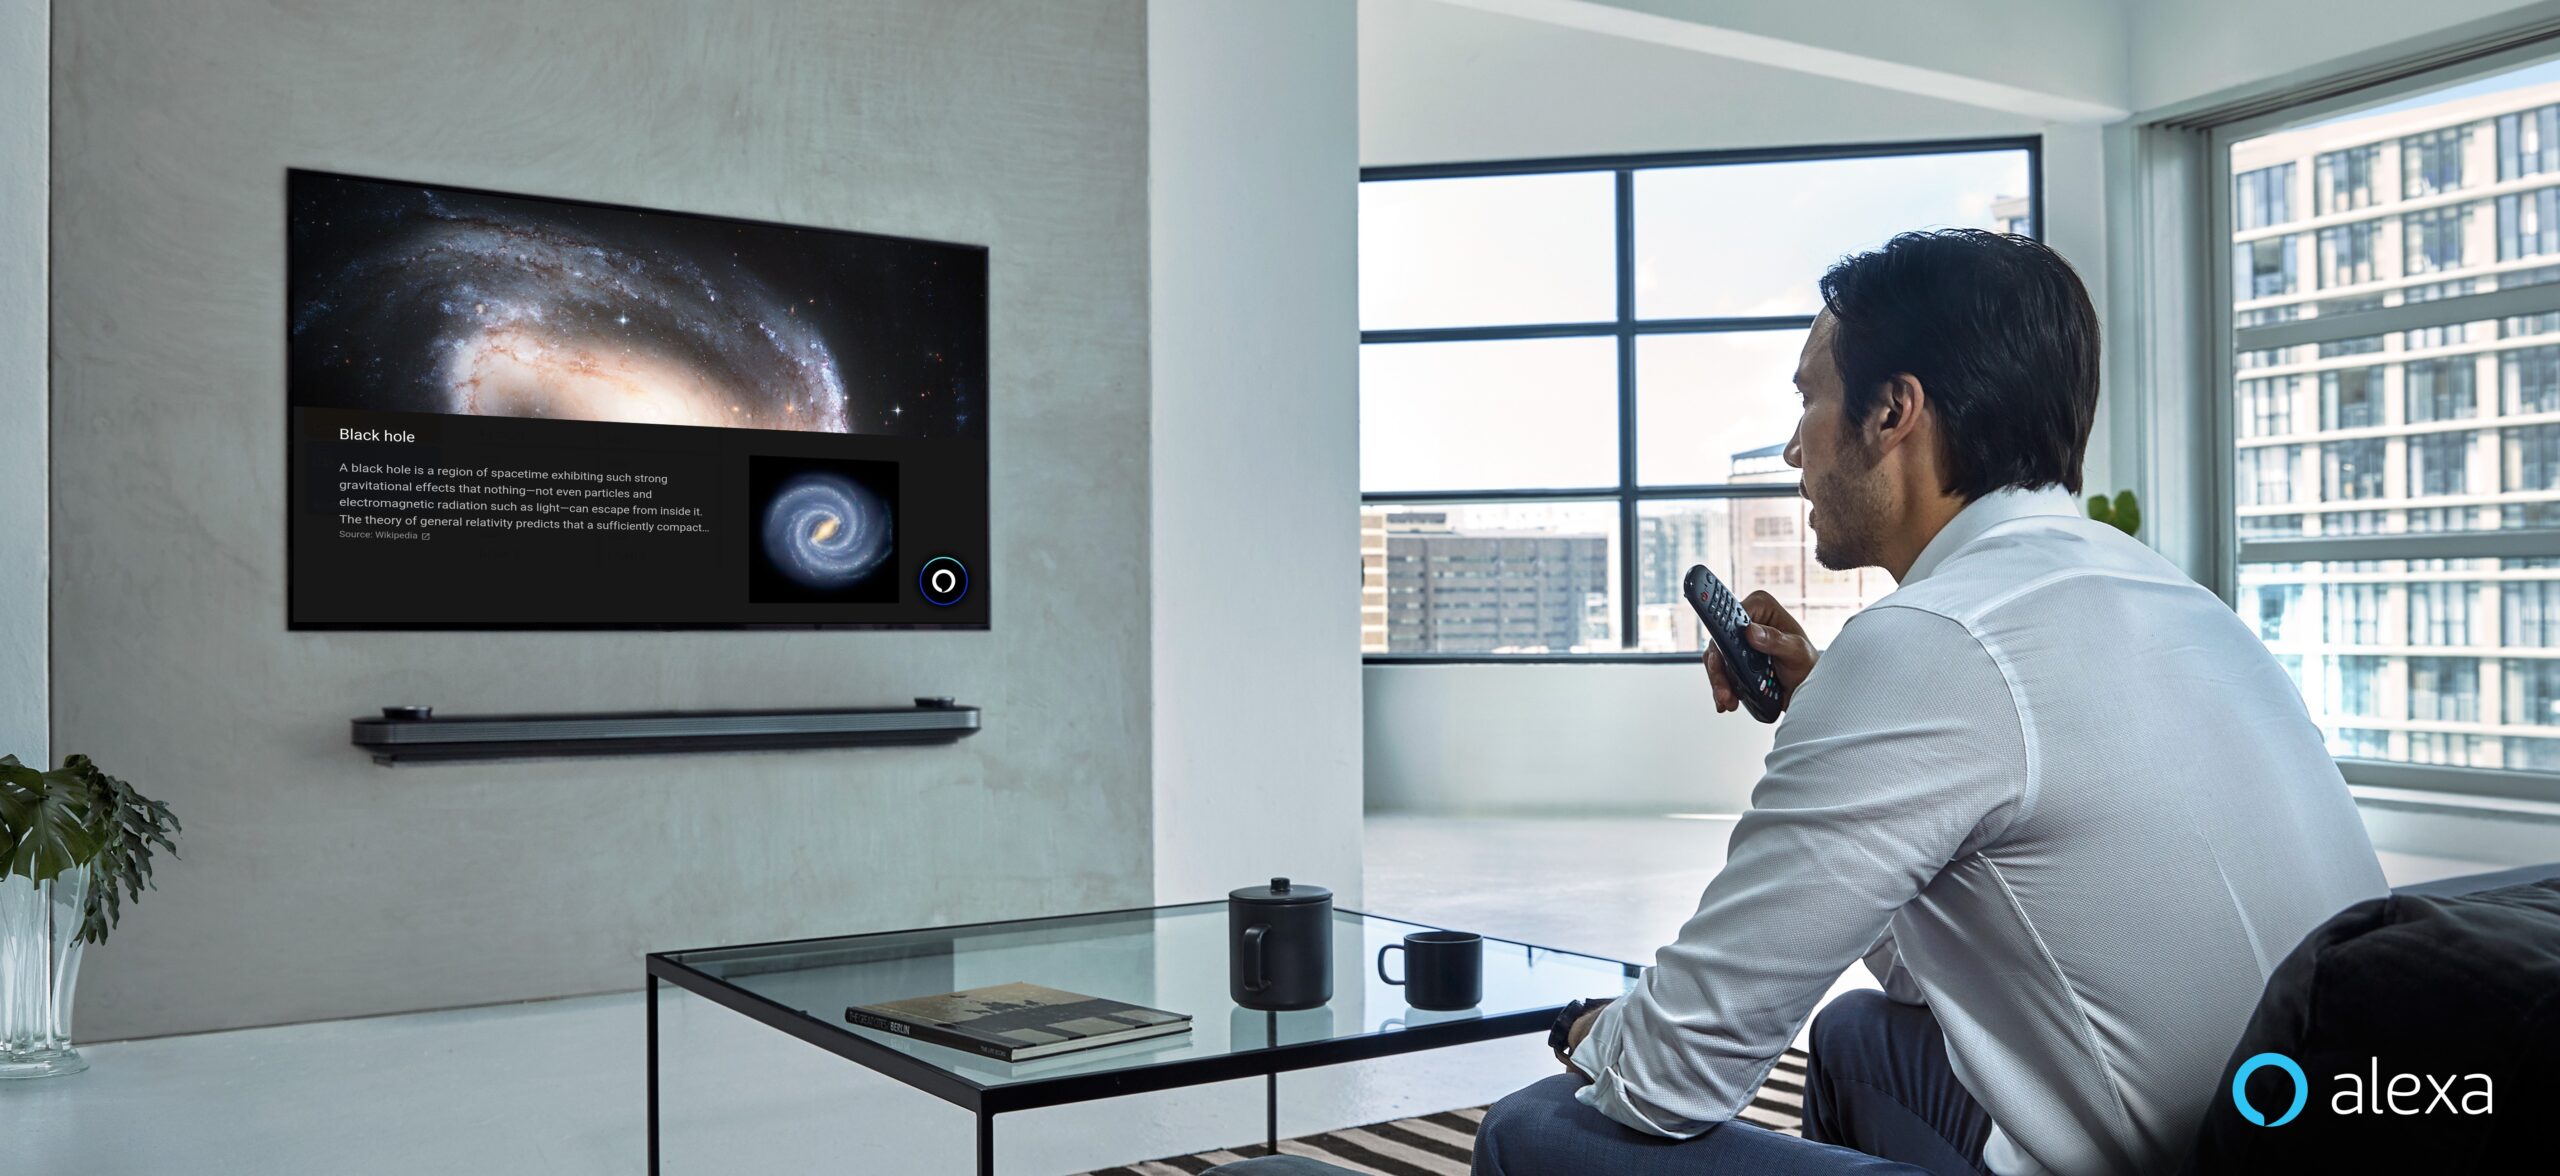 A man is watching LG TV supporting Amazon Alexa while holding the remote in one hand at home